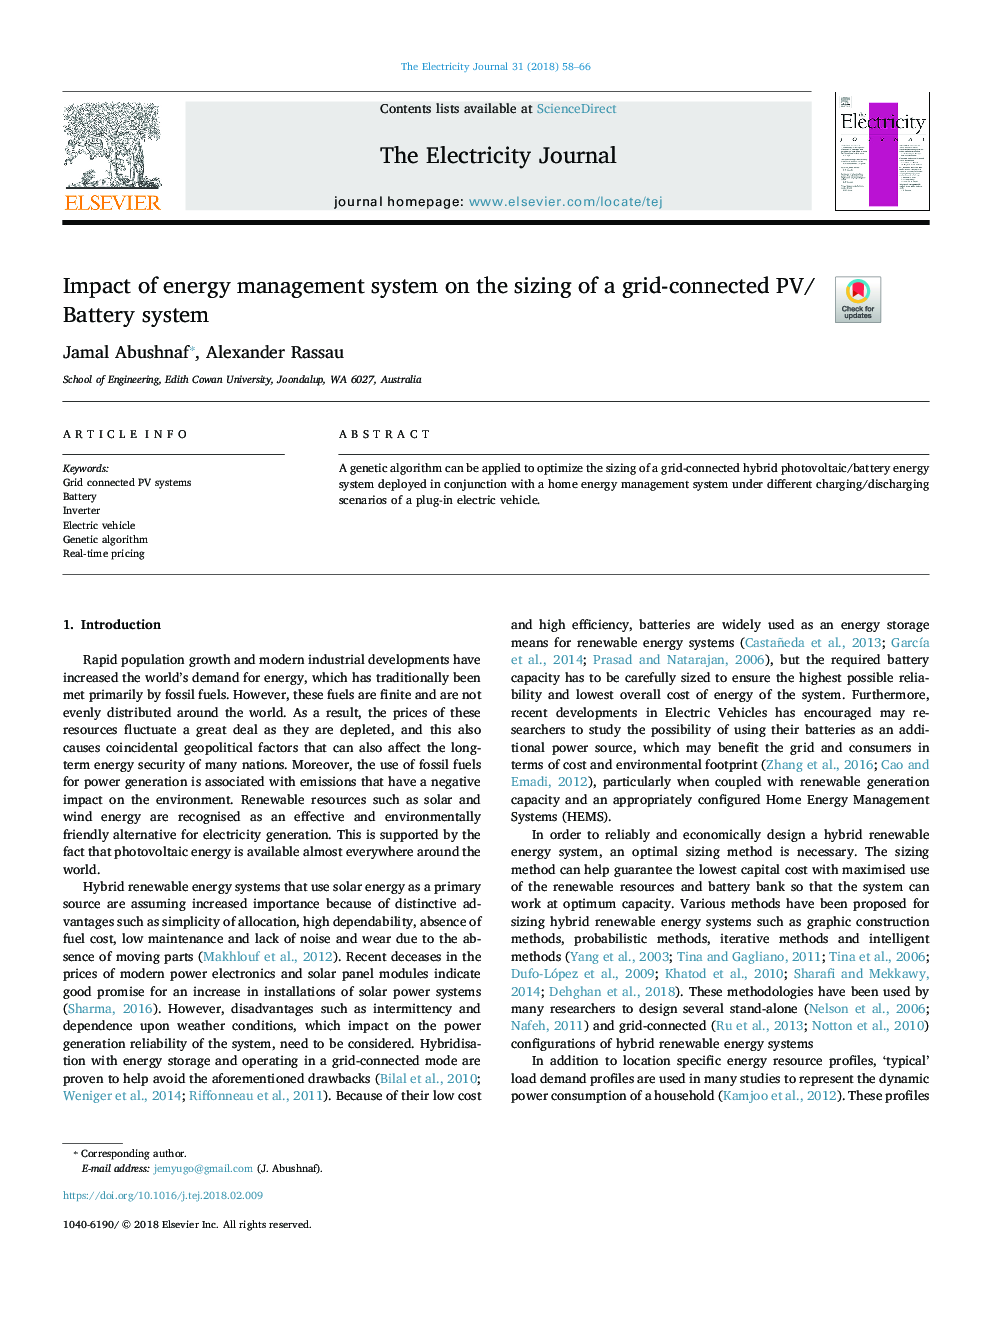 Impact of energy management system on the sizing of a grid-connected PV/Battery system